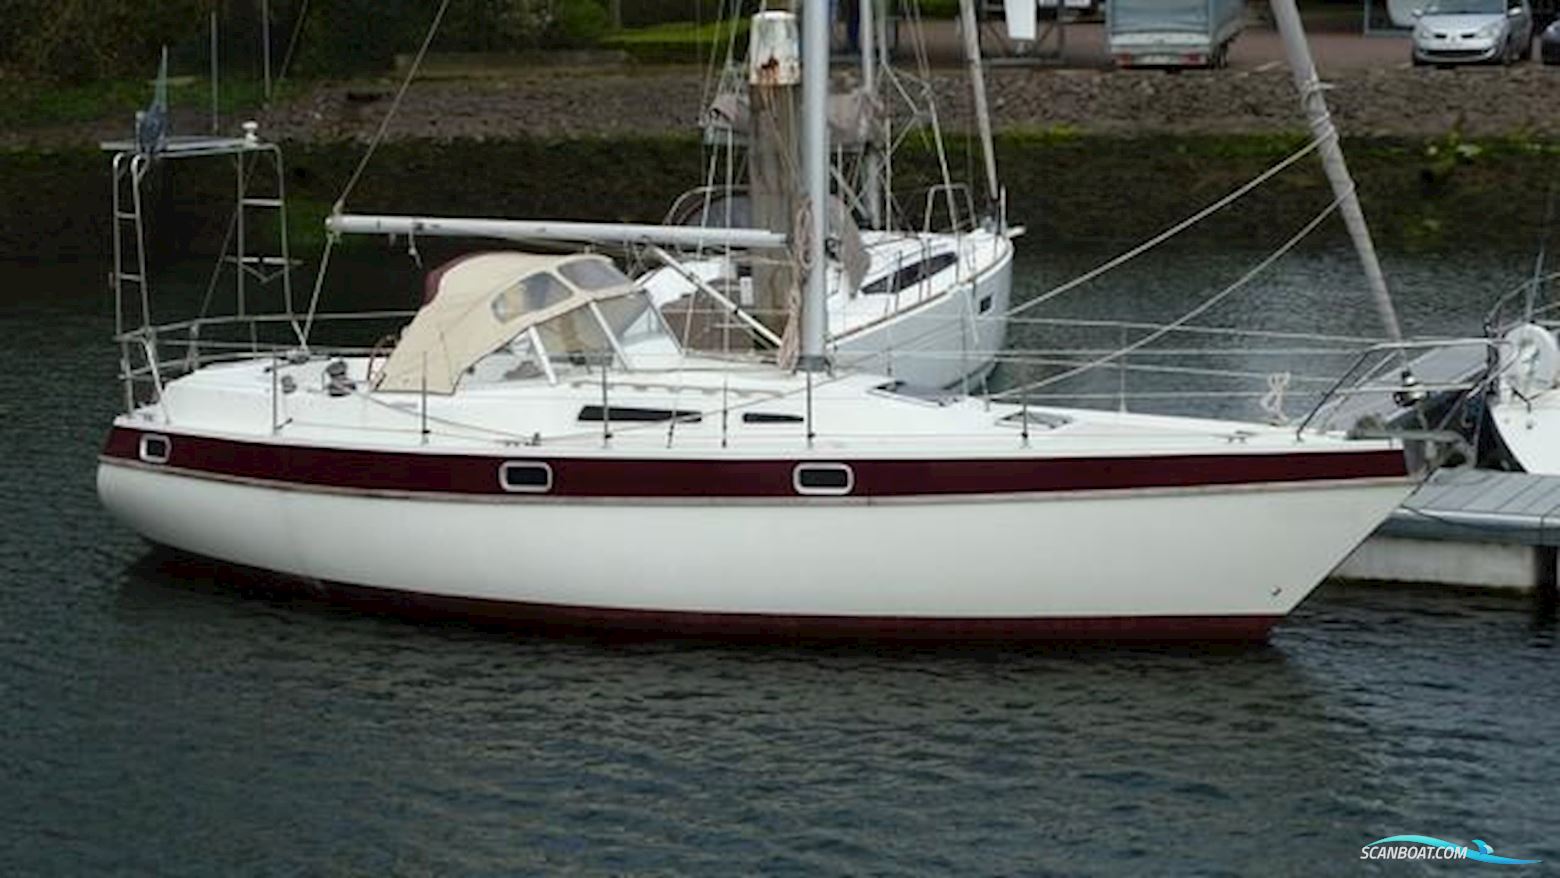 Piewiet 1100 Sailing boat 1988, with Yanmar engine, The Netherlands